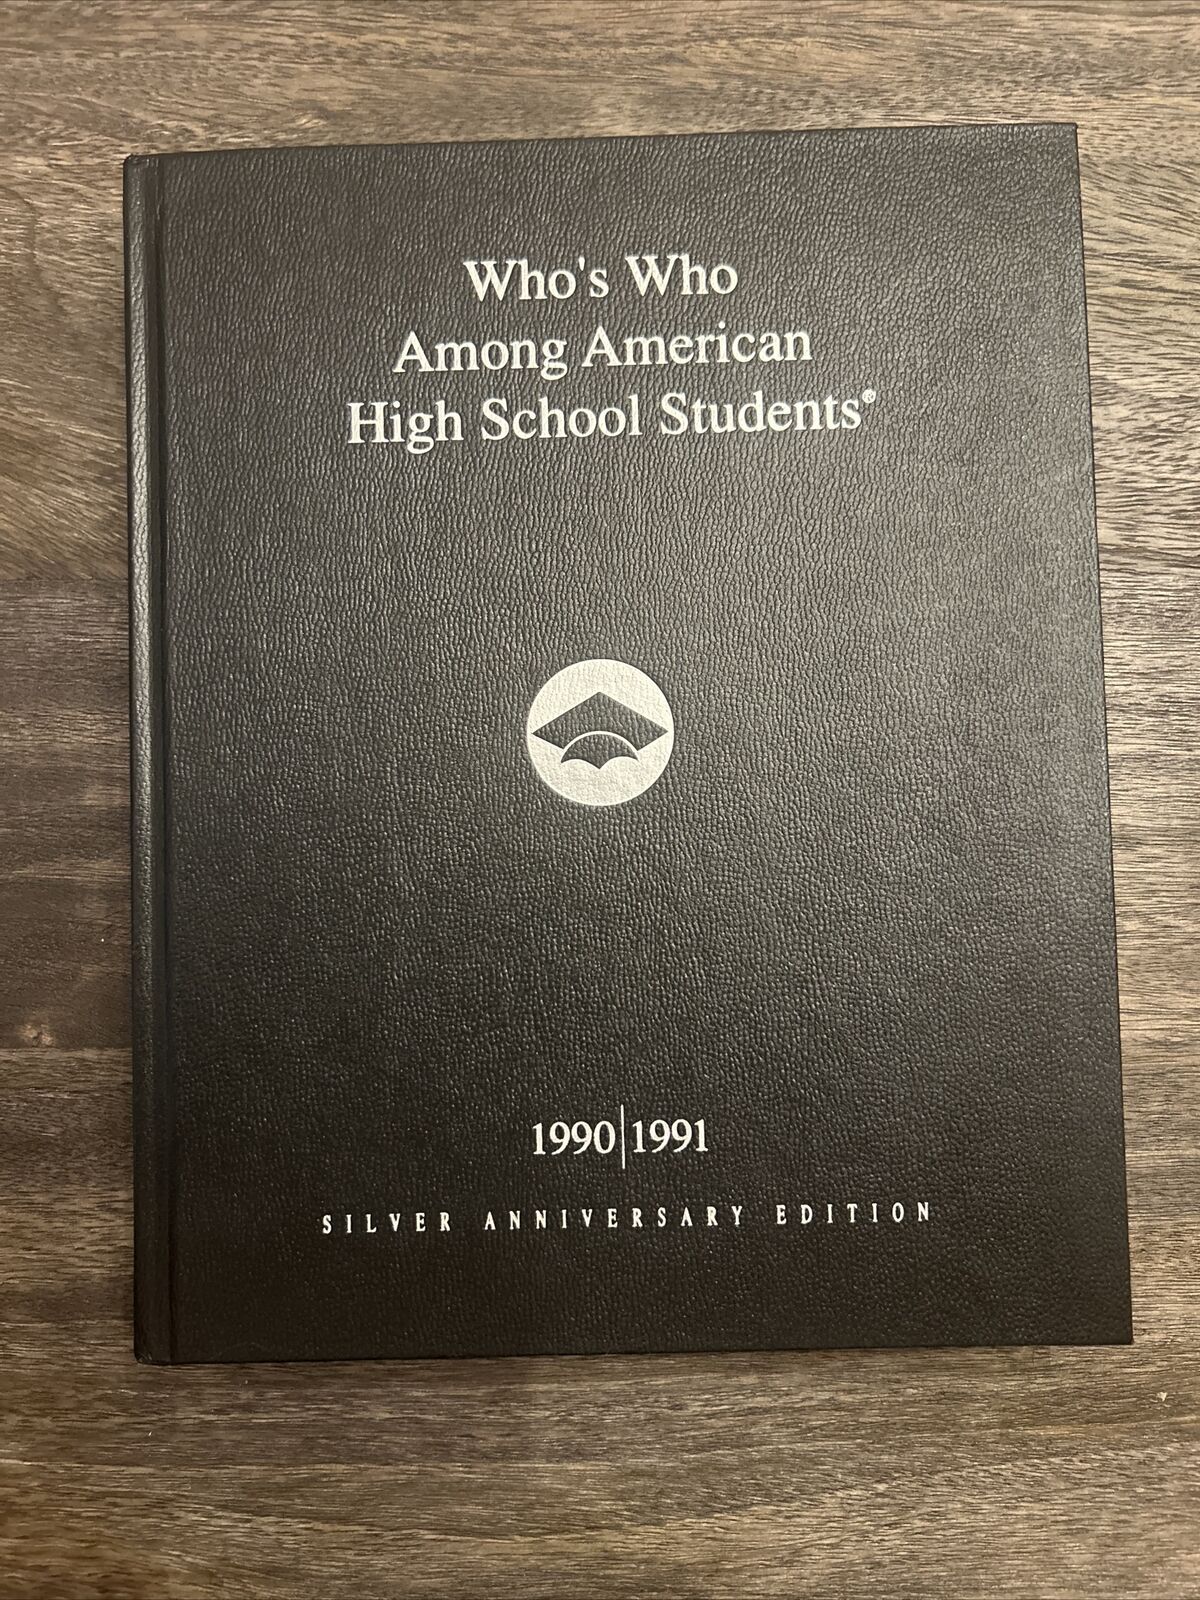 Who's Who Among American High School Students 1990-1991 Hardcover IN MI